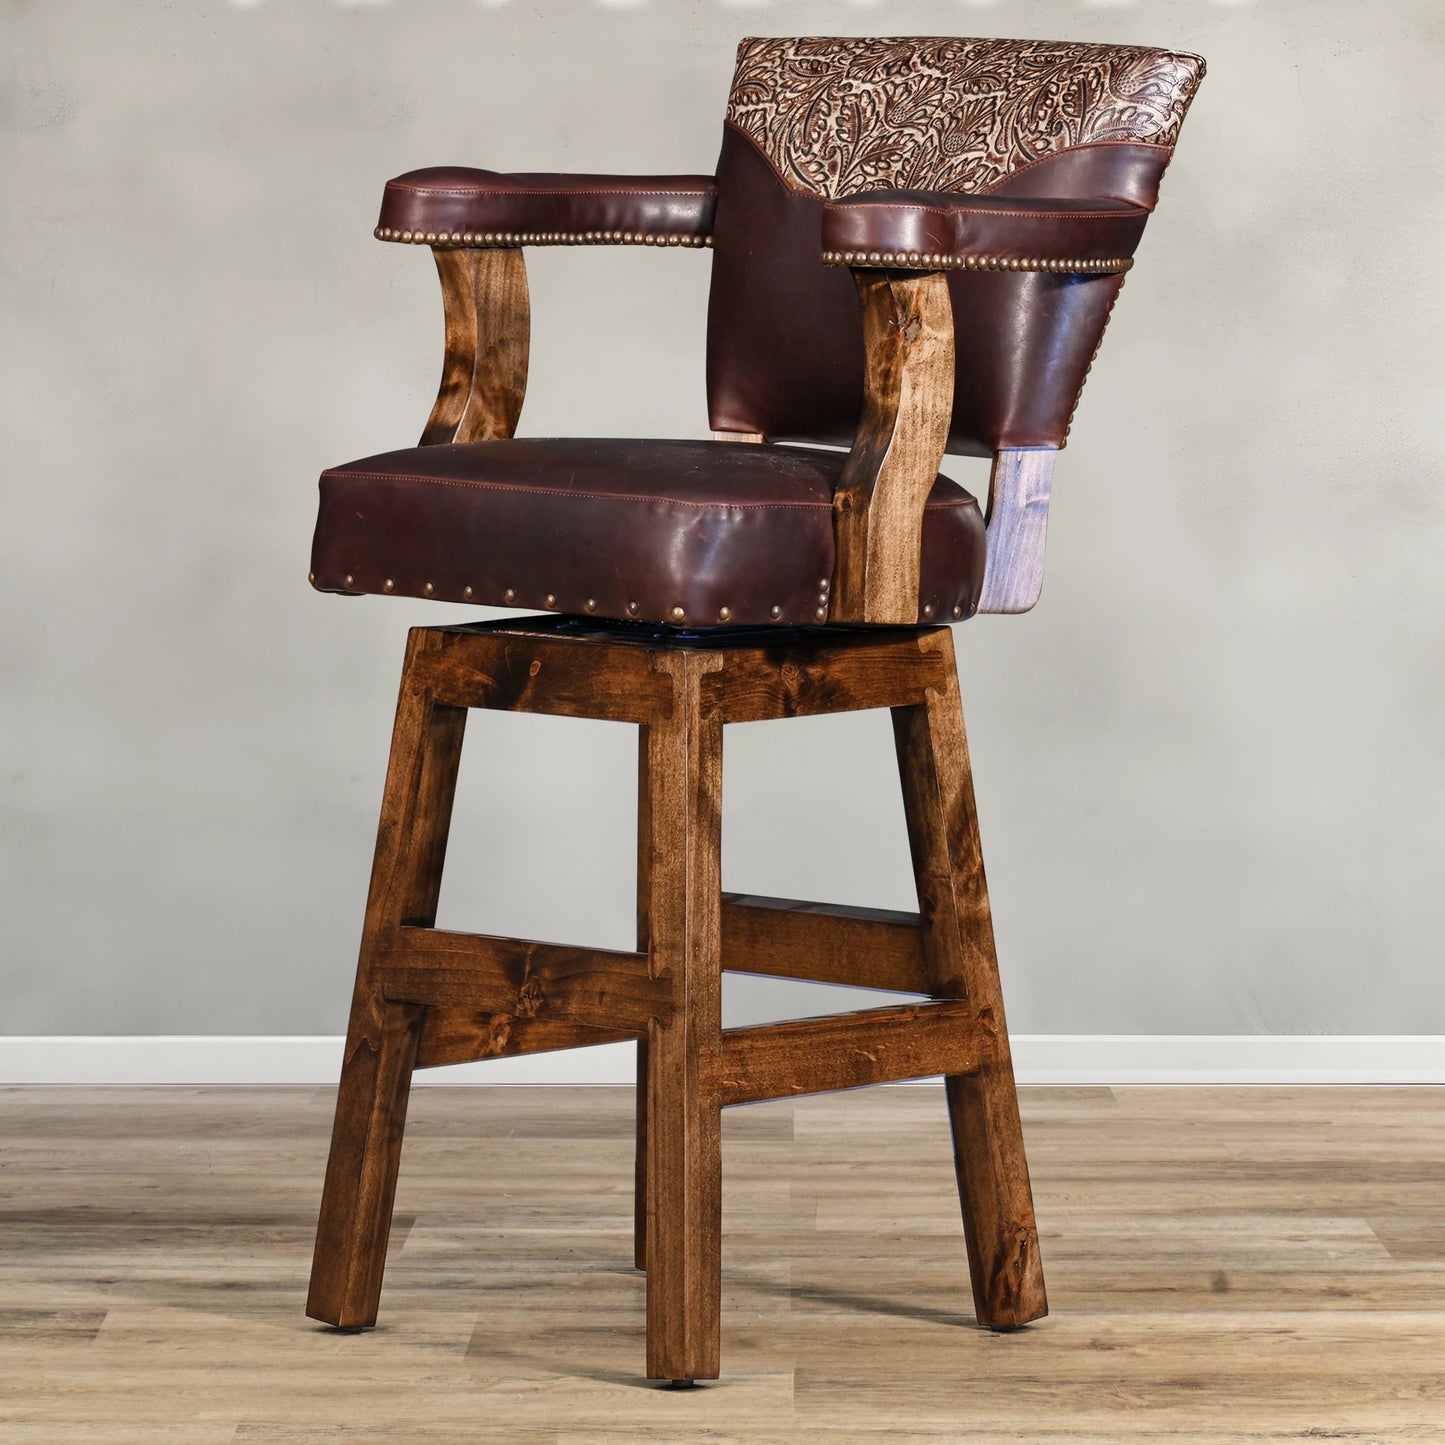 Experience rustic elegance with the Autumn Yoke Chisum Barstool. Its autumn tooled leather yoke and 100% top grain leather add a touch of sophistication, while the swivel feature offers convenience. Perfect for any bar or kitchen, this barstool combines style and function seamlessly.